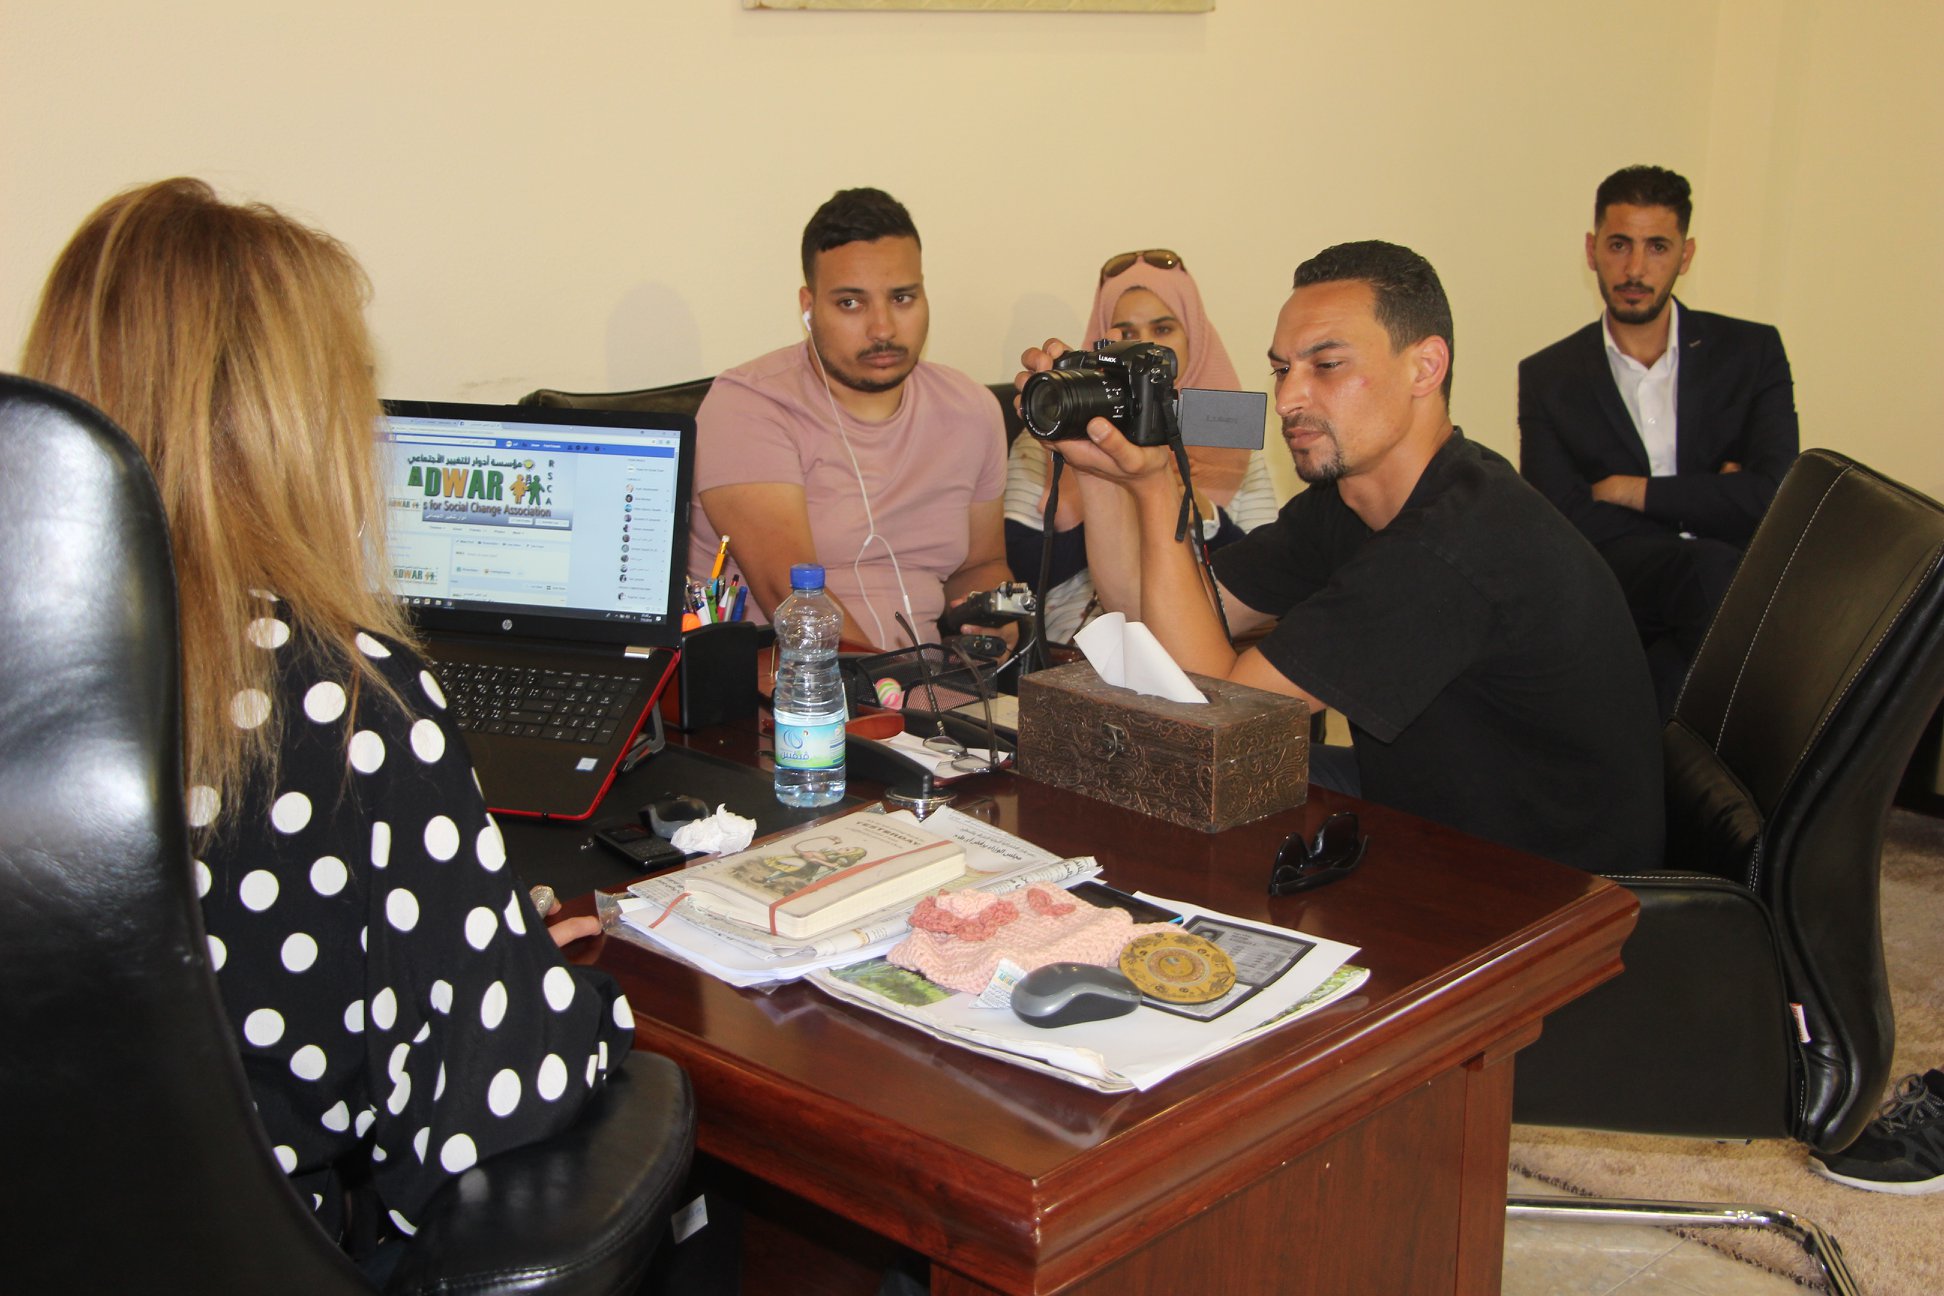  Roles for Social Change Association-ADWAR hosted French in order to conduct a documentary film on ADWAR Association role in protecting women’s legal rights